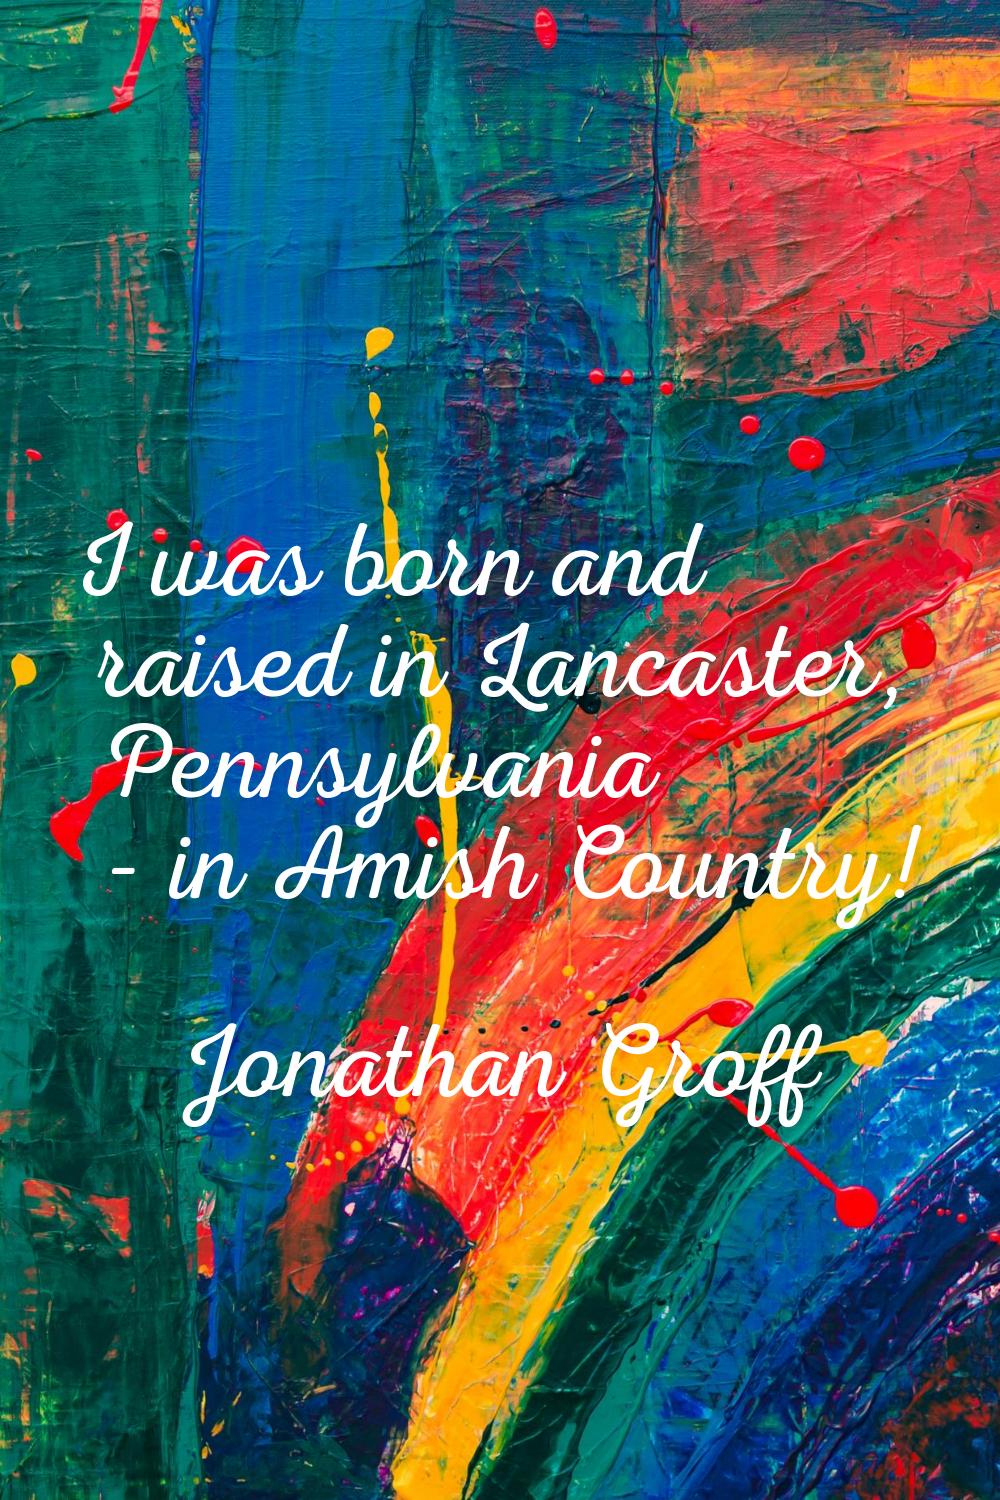 I was born and raised in Lancaster, Pennsylvania - in Amish Country!